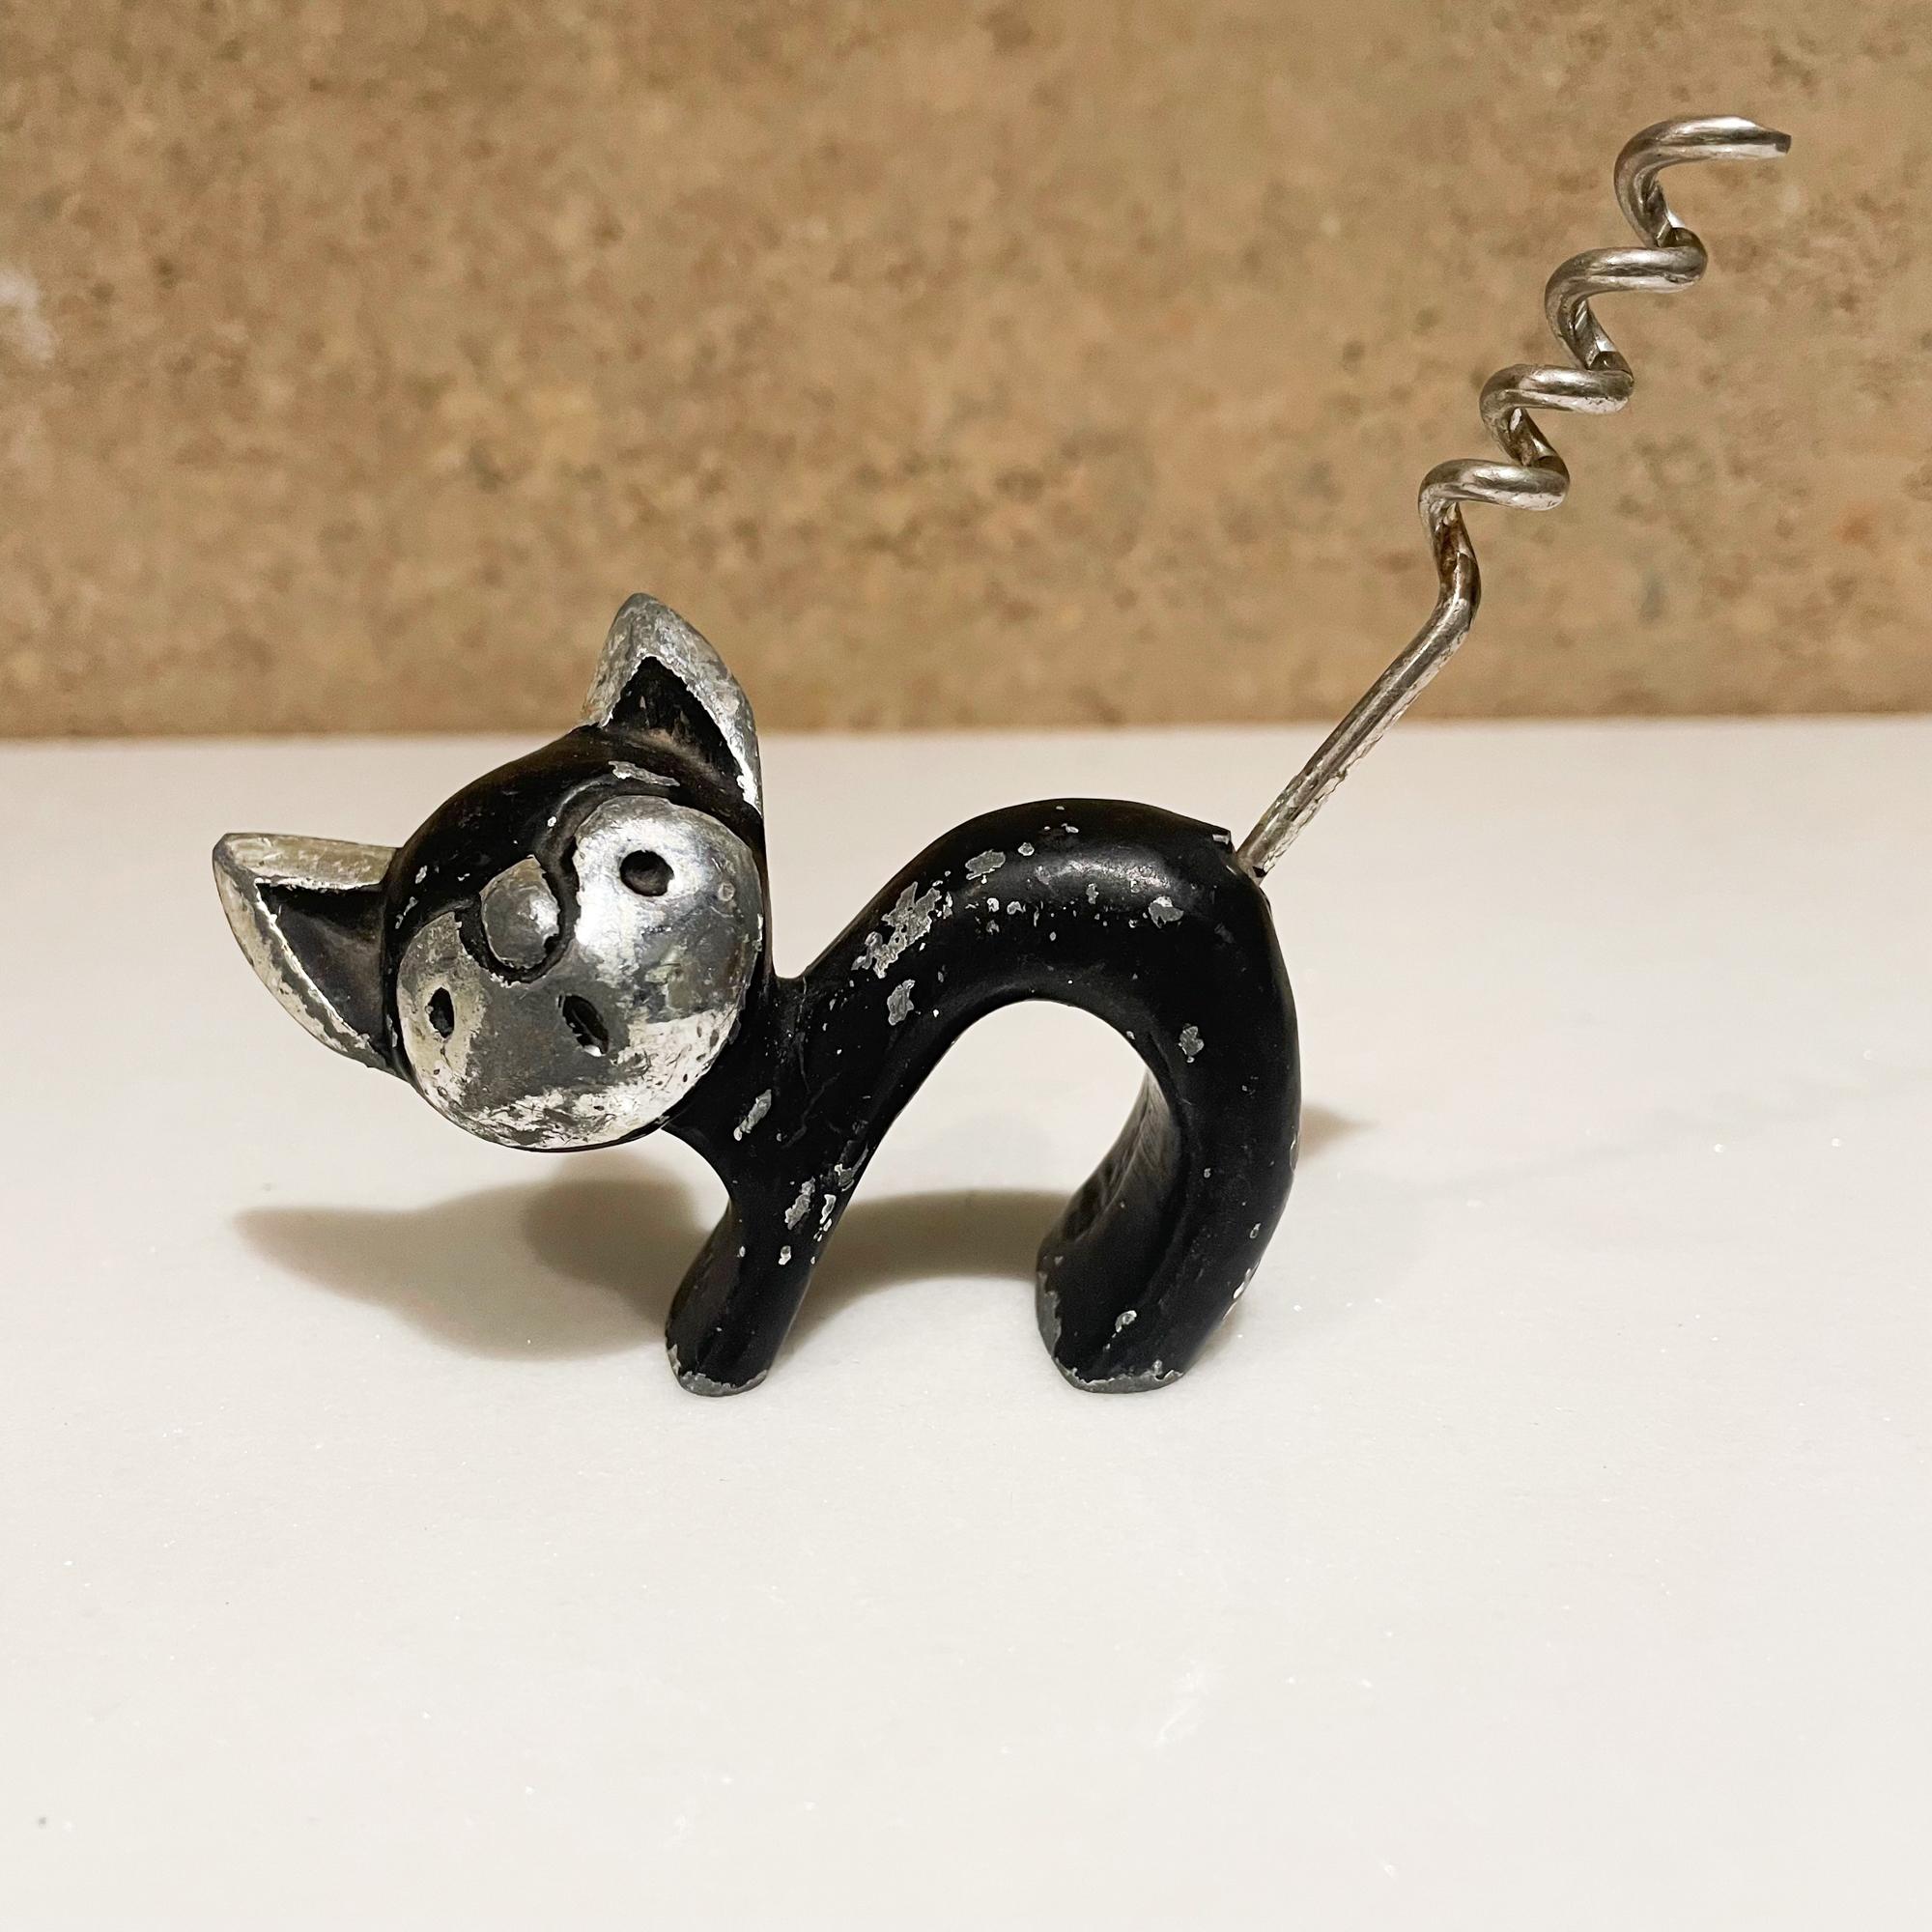 Bottle Opener
Delightful Mid-Century Modern cat wine bottle corkscrew opener 1950s
Black paint on aluminum in chrome-plate.
Attributed to Walter Bosse for Hertha Baller.
Unmarked.
Measures: 4.25 W x 1.25 D x 3.25 tall inches
Original vintage